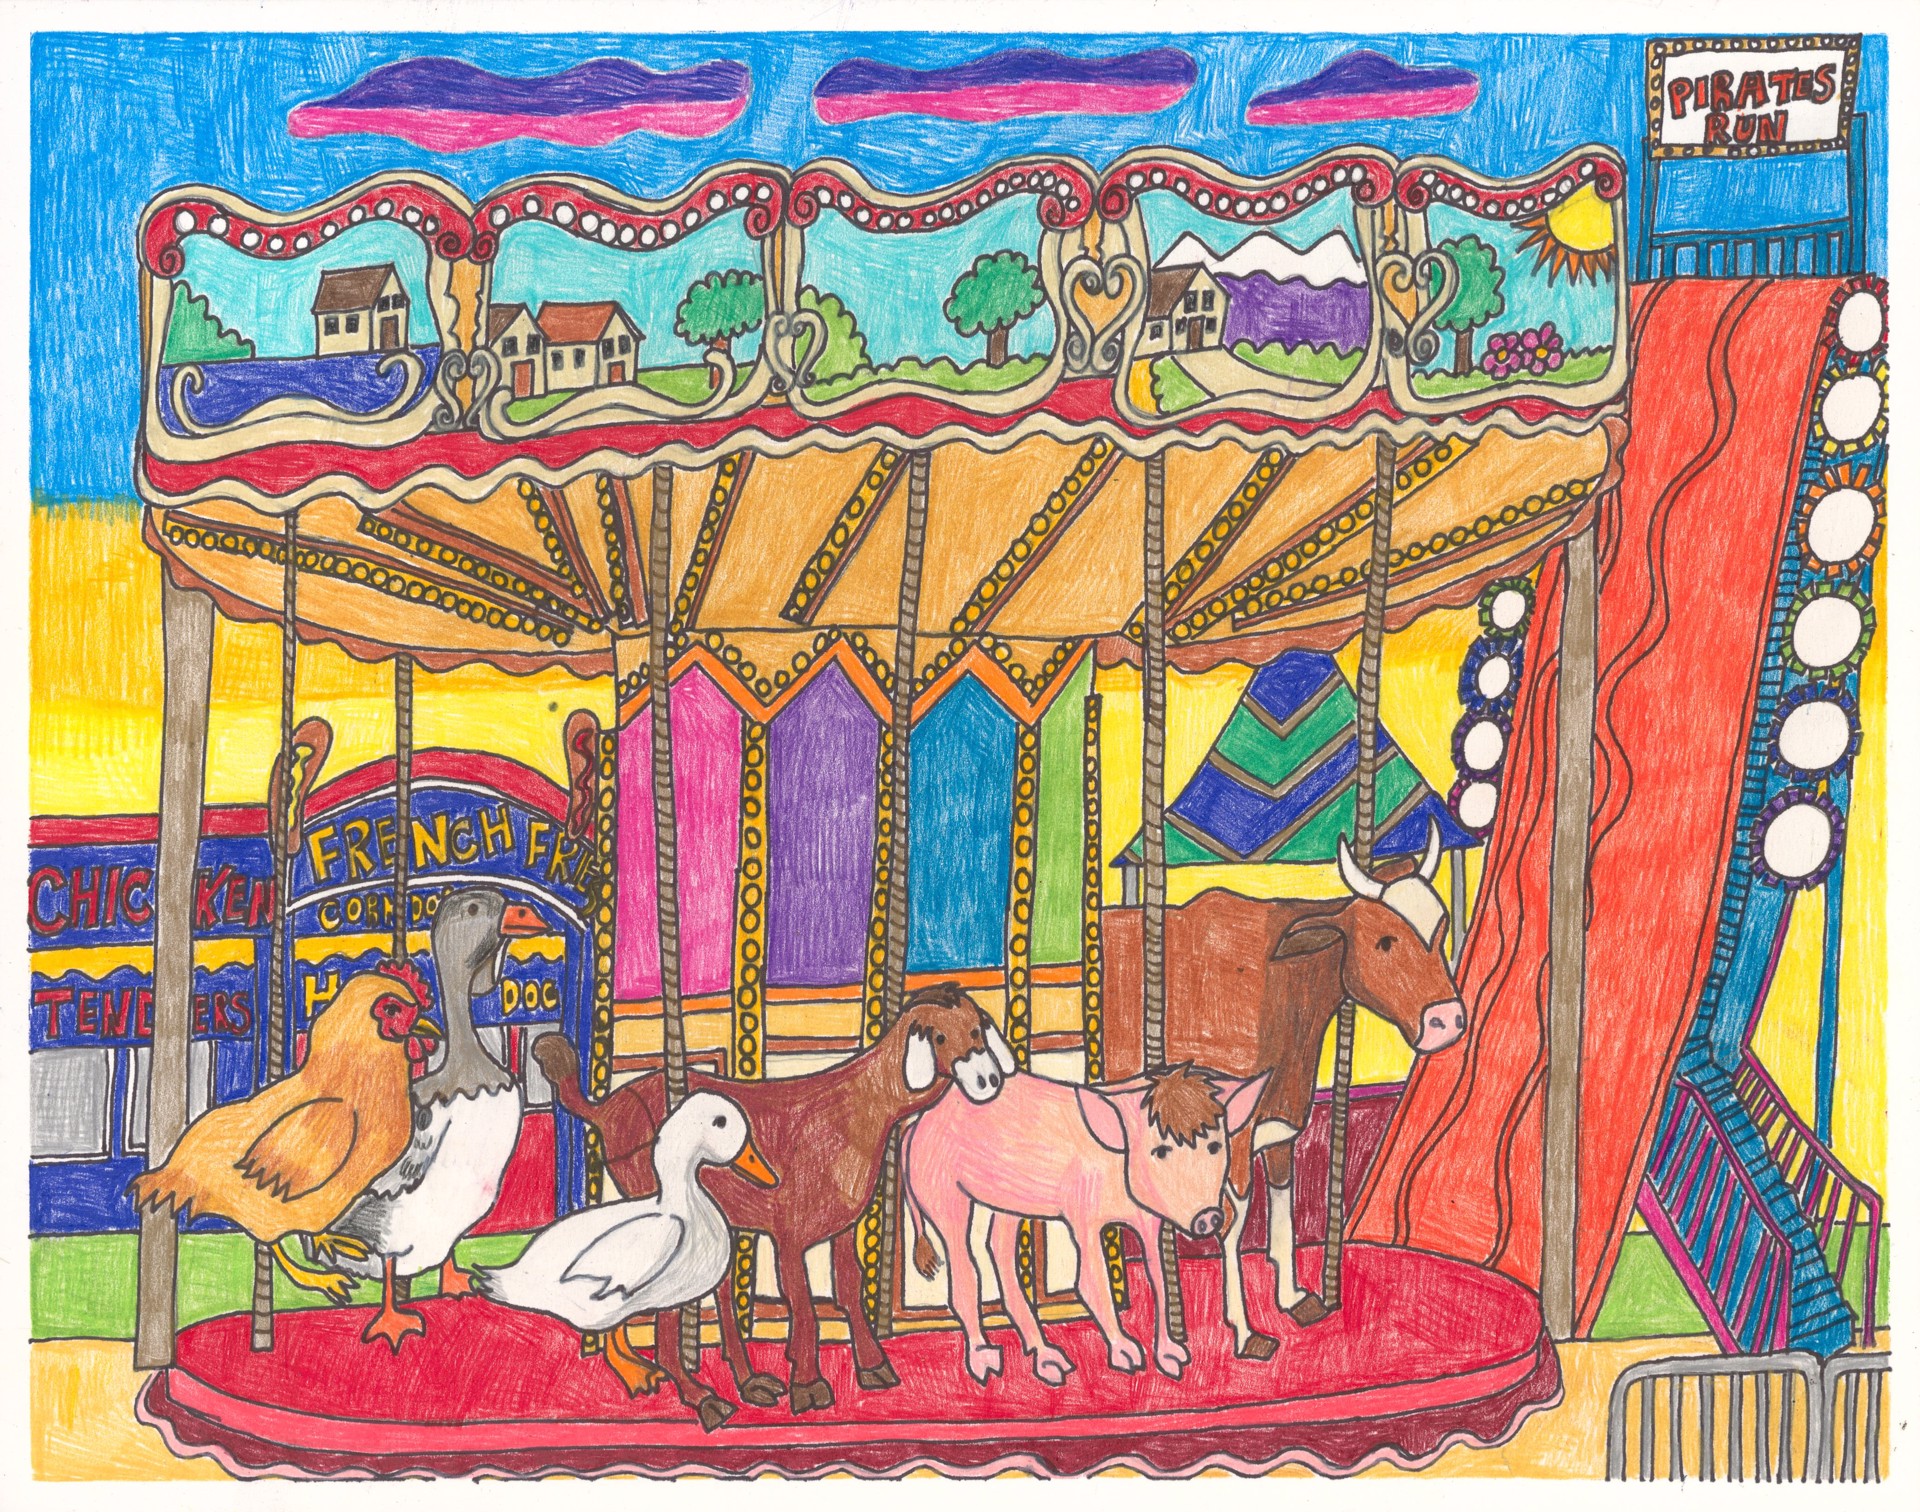 Carousel Fun by Jacqueline Coleman